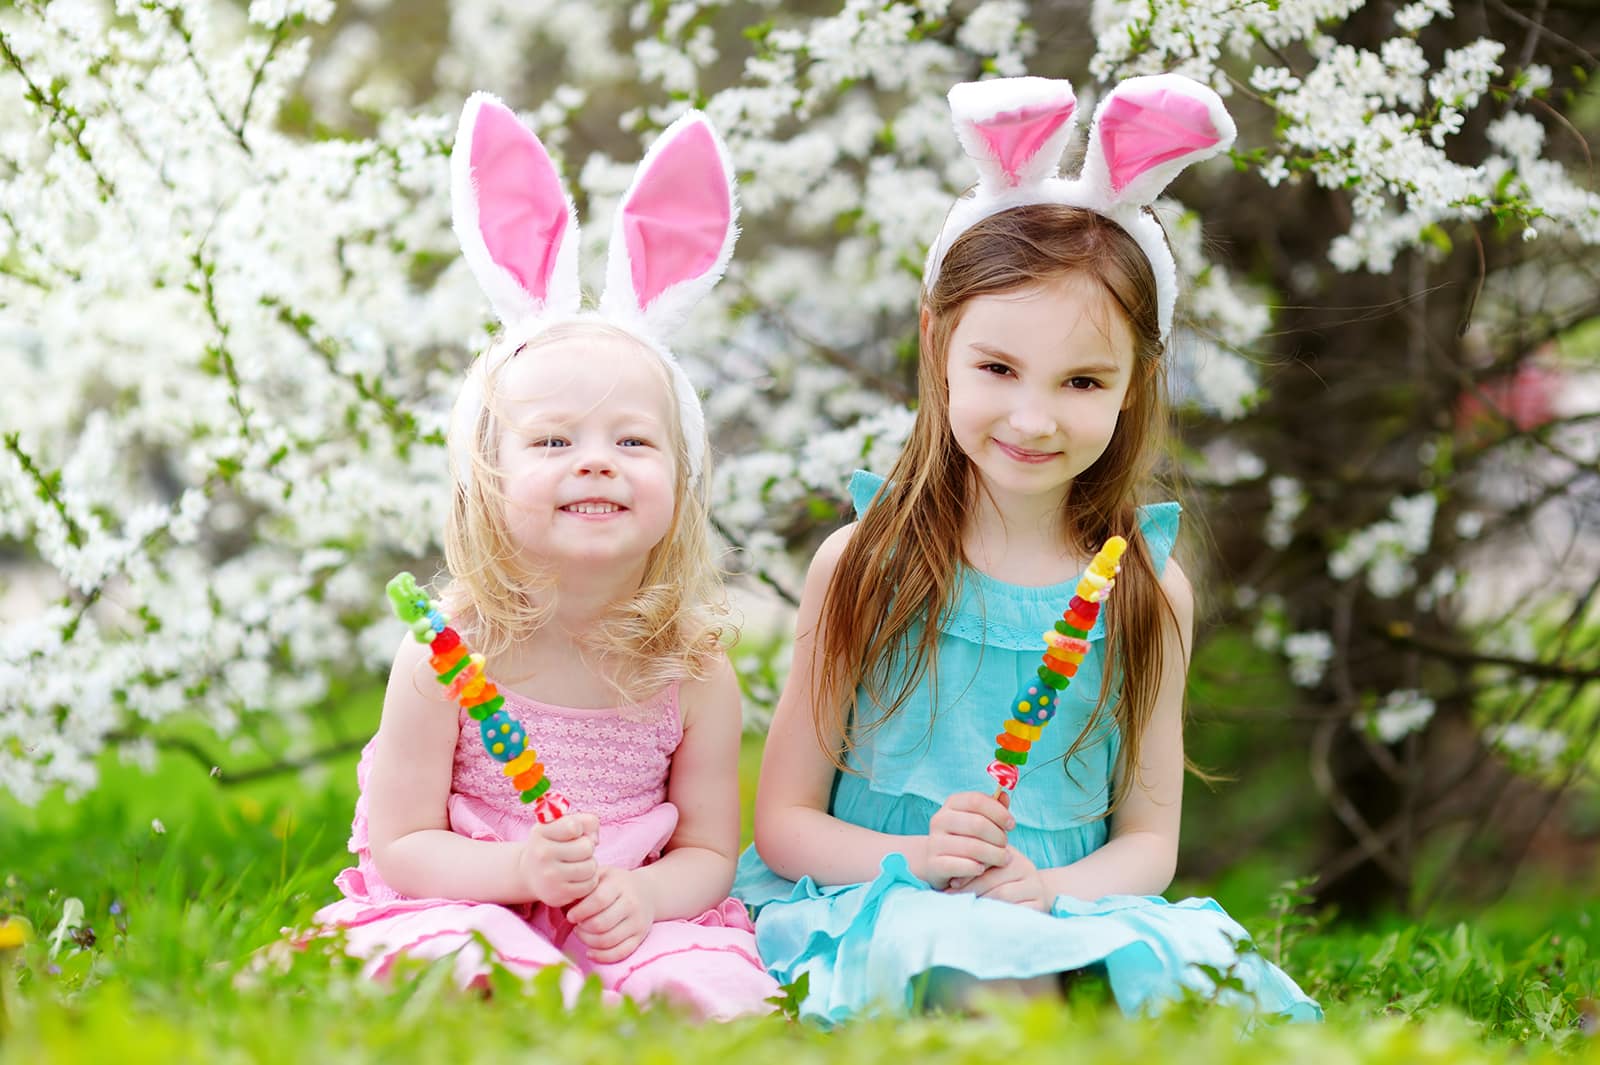 Two adorable little sisters eating colorful gum candies on Easte